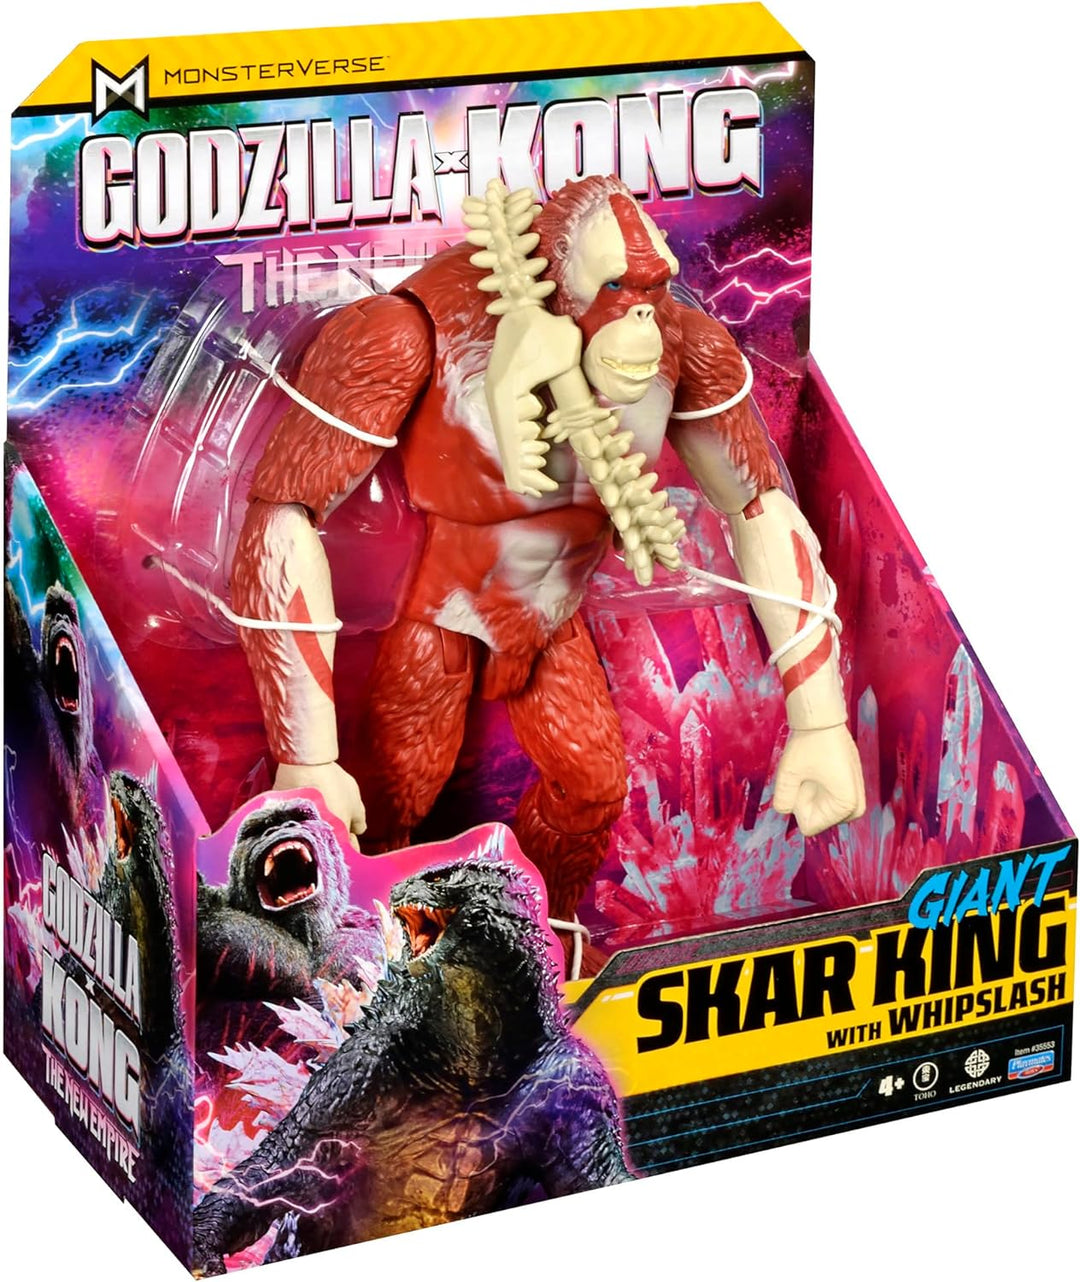 Godzilla x Kong The New Empire 11" Giant Skar King with Whipslash Action Figure